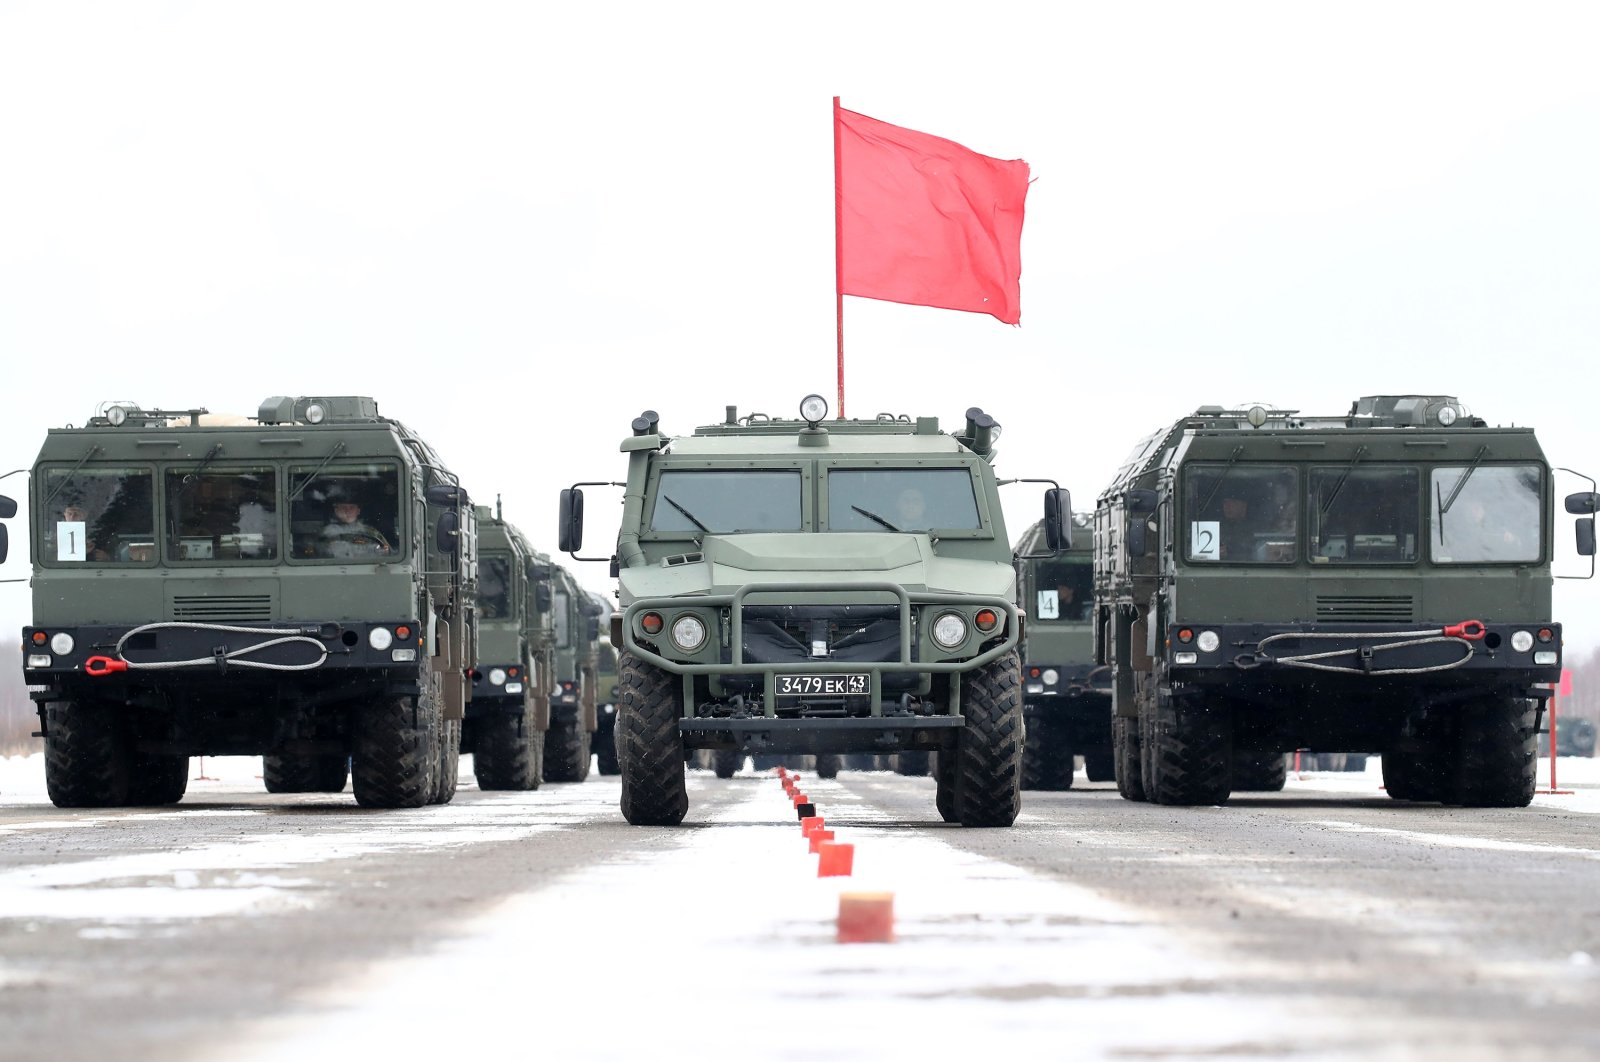 GAZ Tigr all-terrain infantry mobility vehicles (C) and Iskander-M mobile short-range ballistic missile systems of the Russian Army St. Petersburg Garrison are seen on Gorelovo Airfield during a rehearsal for the forthcoming 9 May Victory Day parade, March 19, 2021. (Reuters Photo)